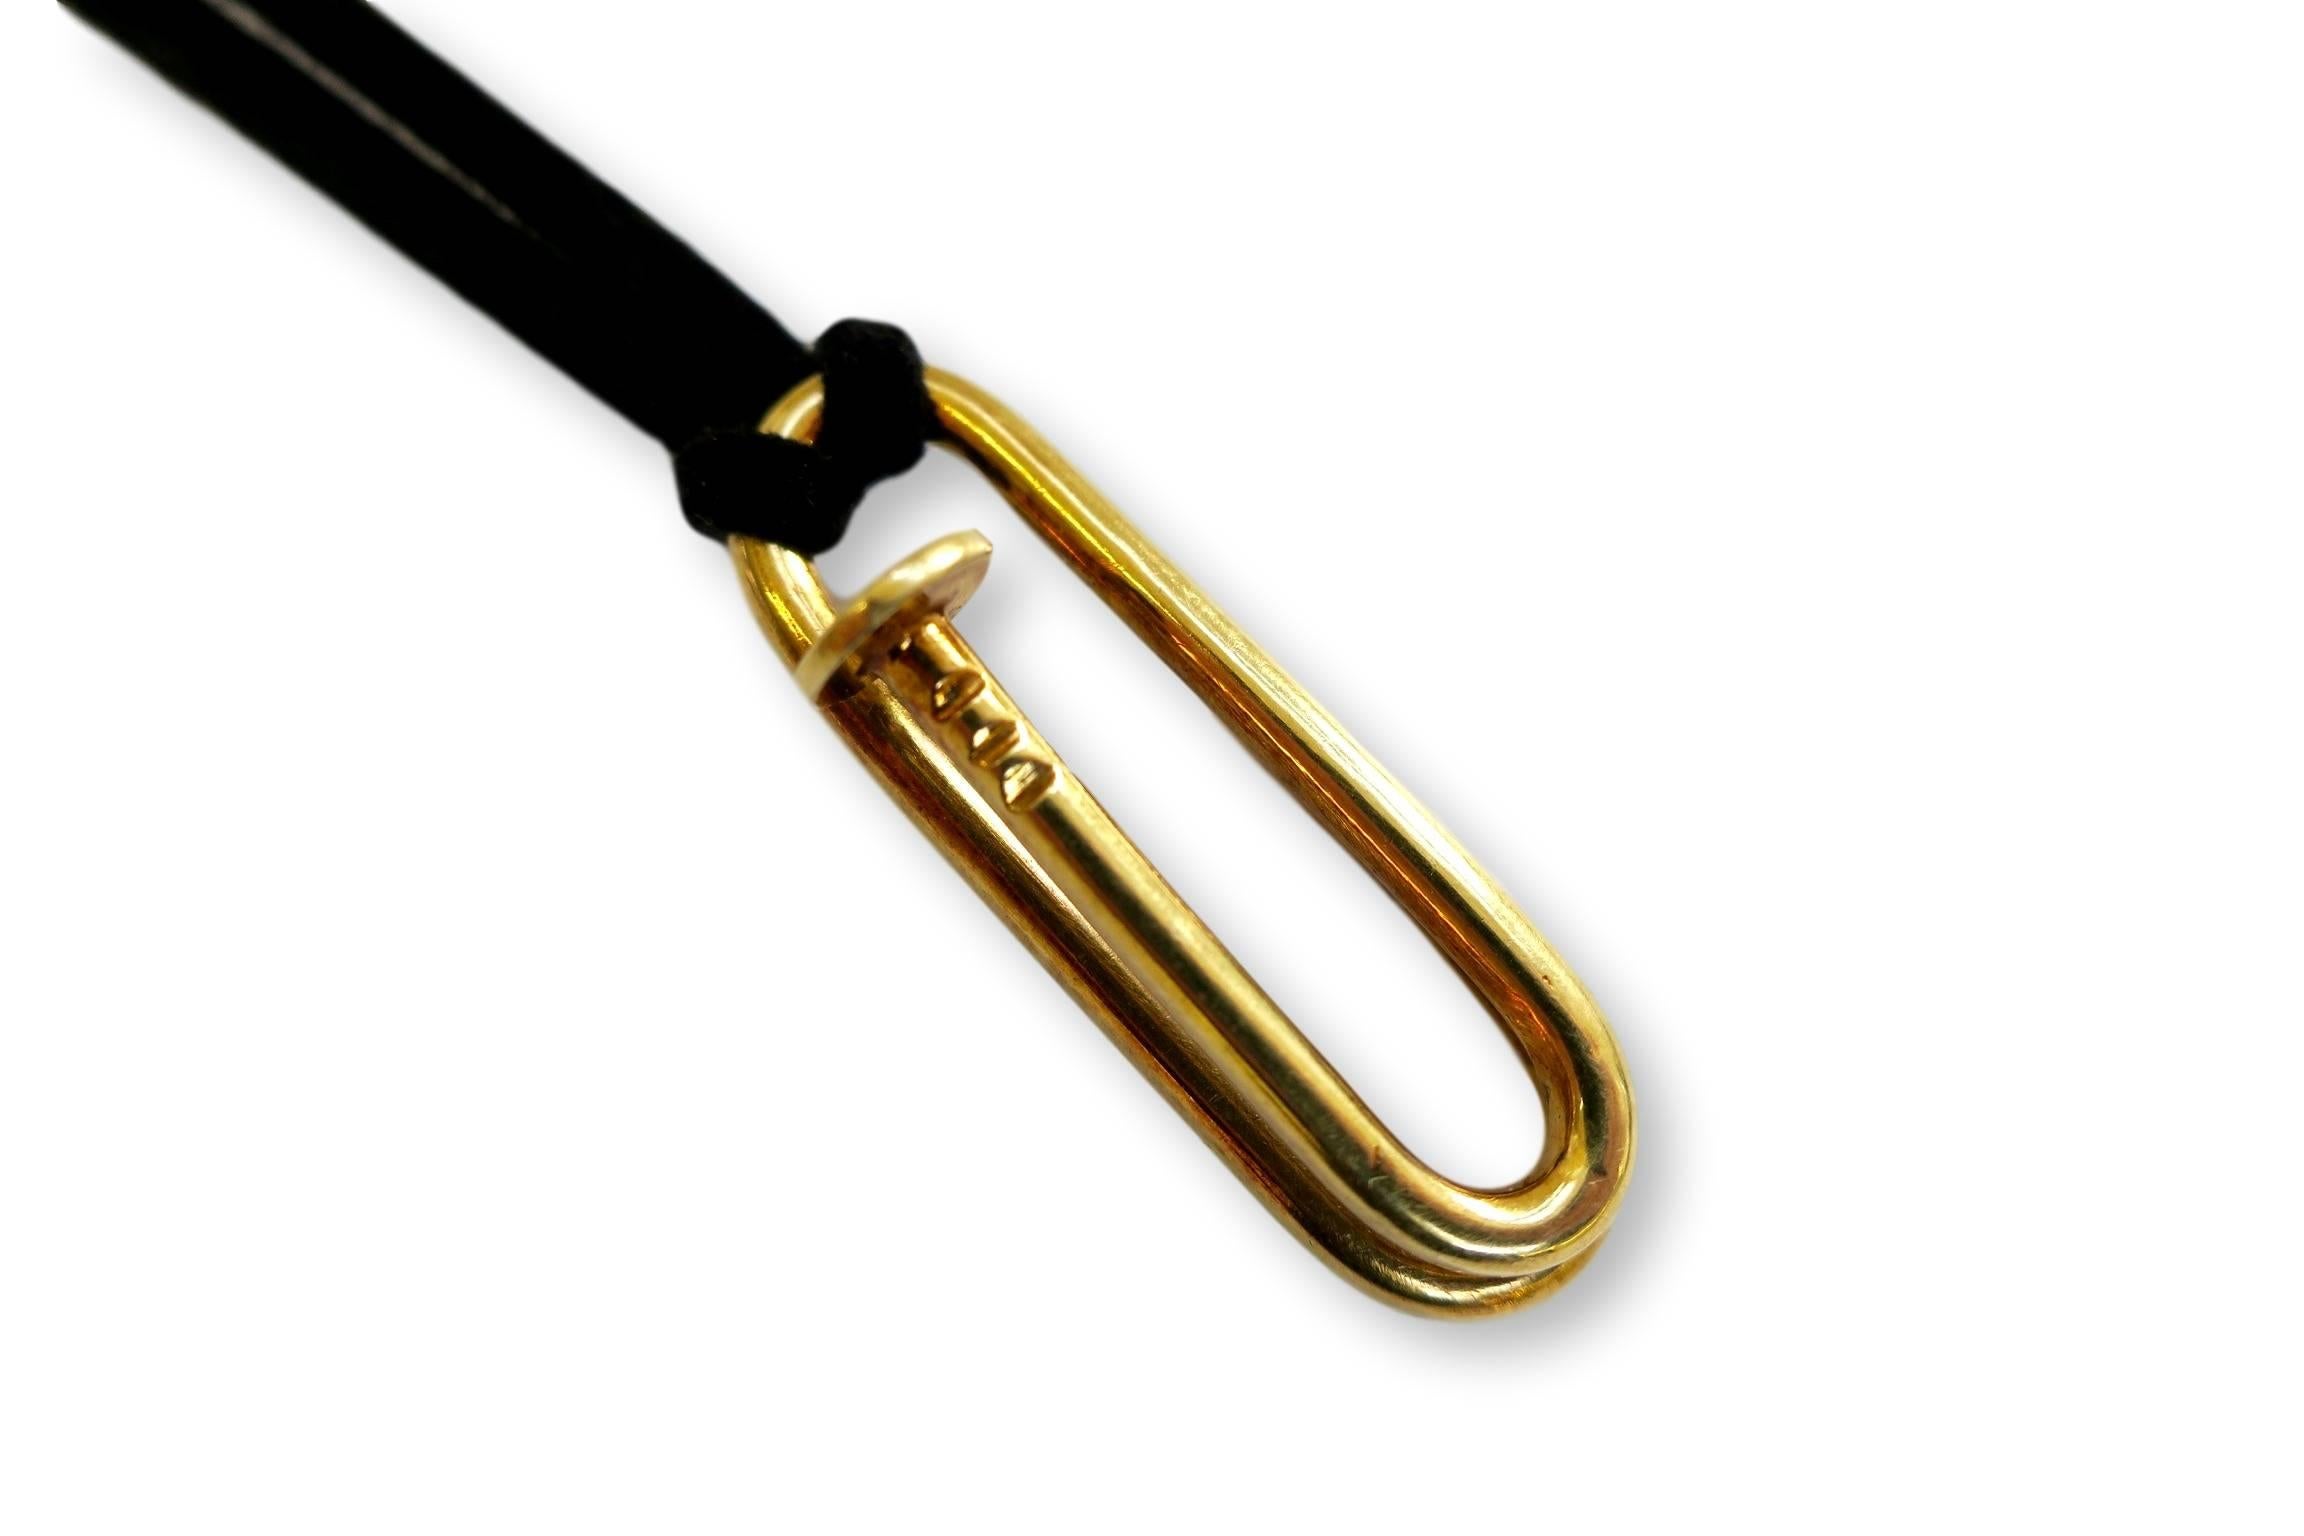 Vintage Cipullo Juste un Clou style pendant. A 1 1/2" 18k yellow gold bent "nail".  Use this multi-functional jewel as a gold money-clip or paper-clip , not that extravagant.. then try it the way we like it as a pendant!  Looks great